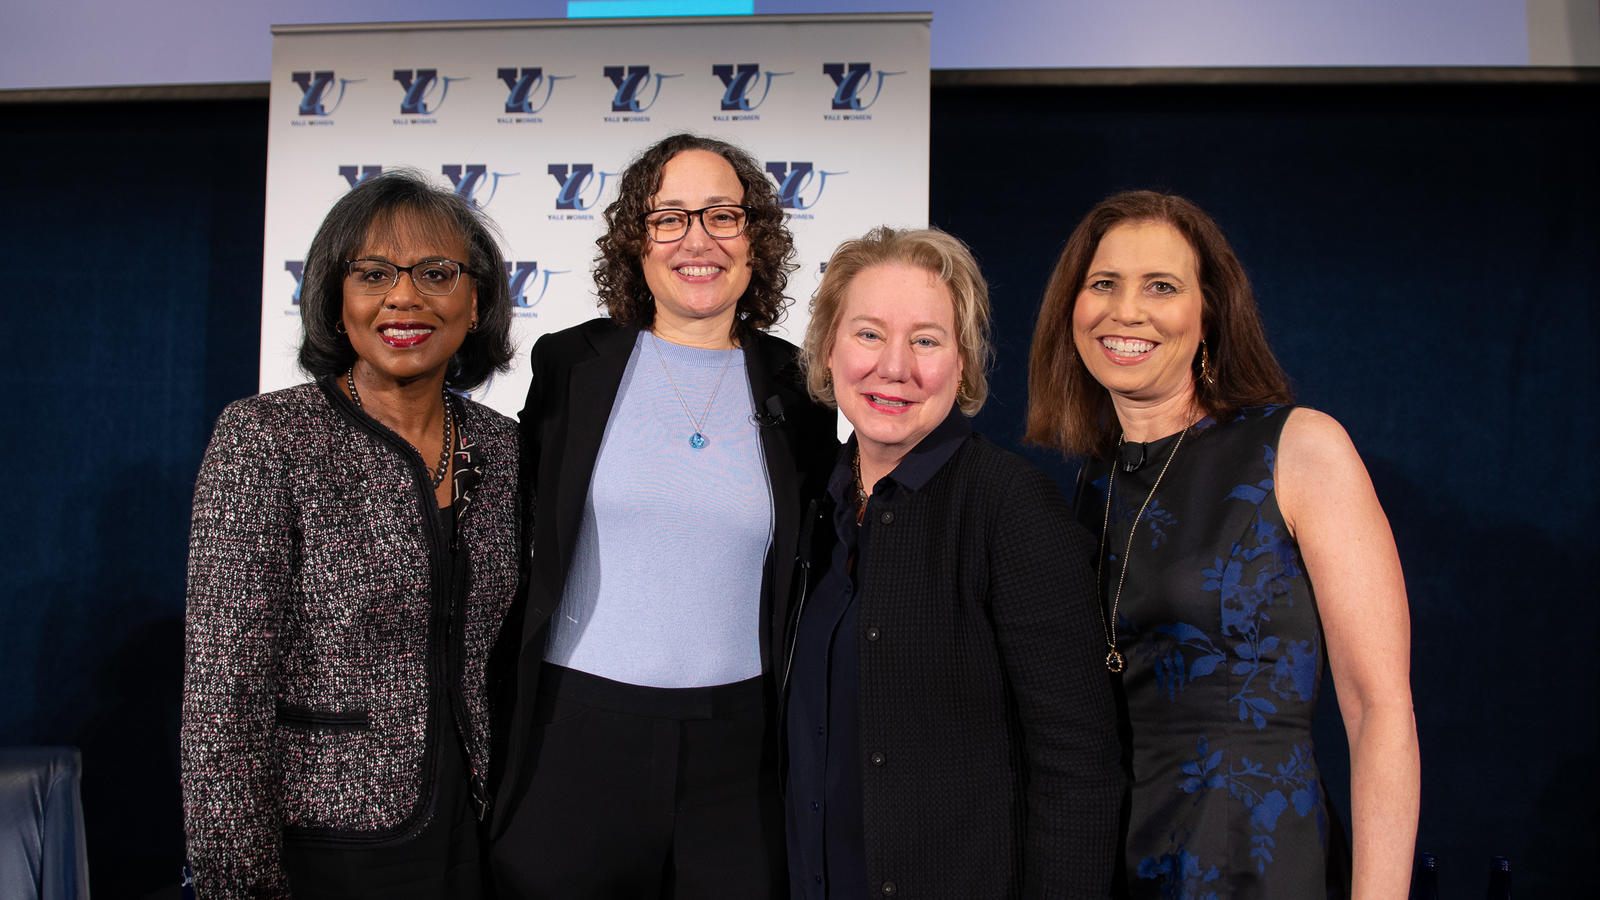 The recipients of the lifetime achievement award gather during this year's YaleWomen Awards for Excellence.